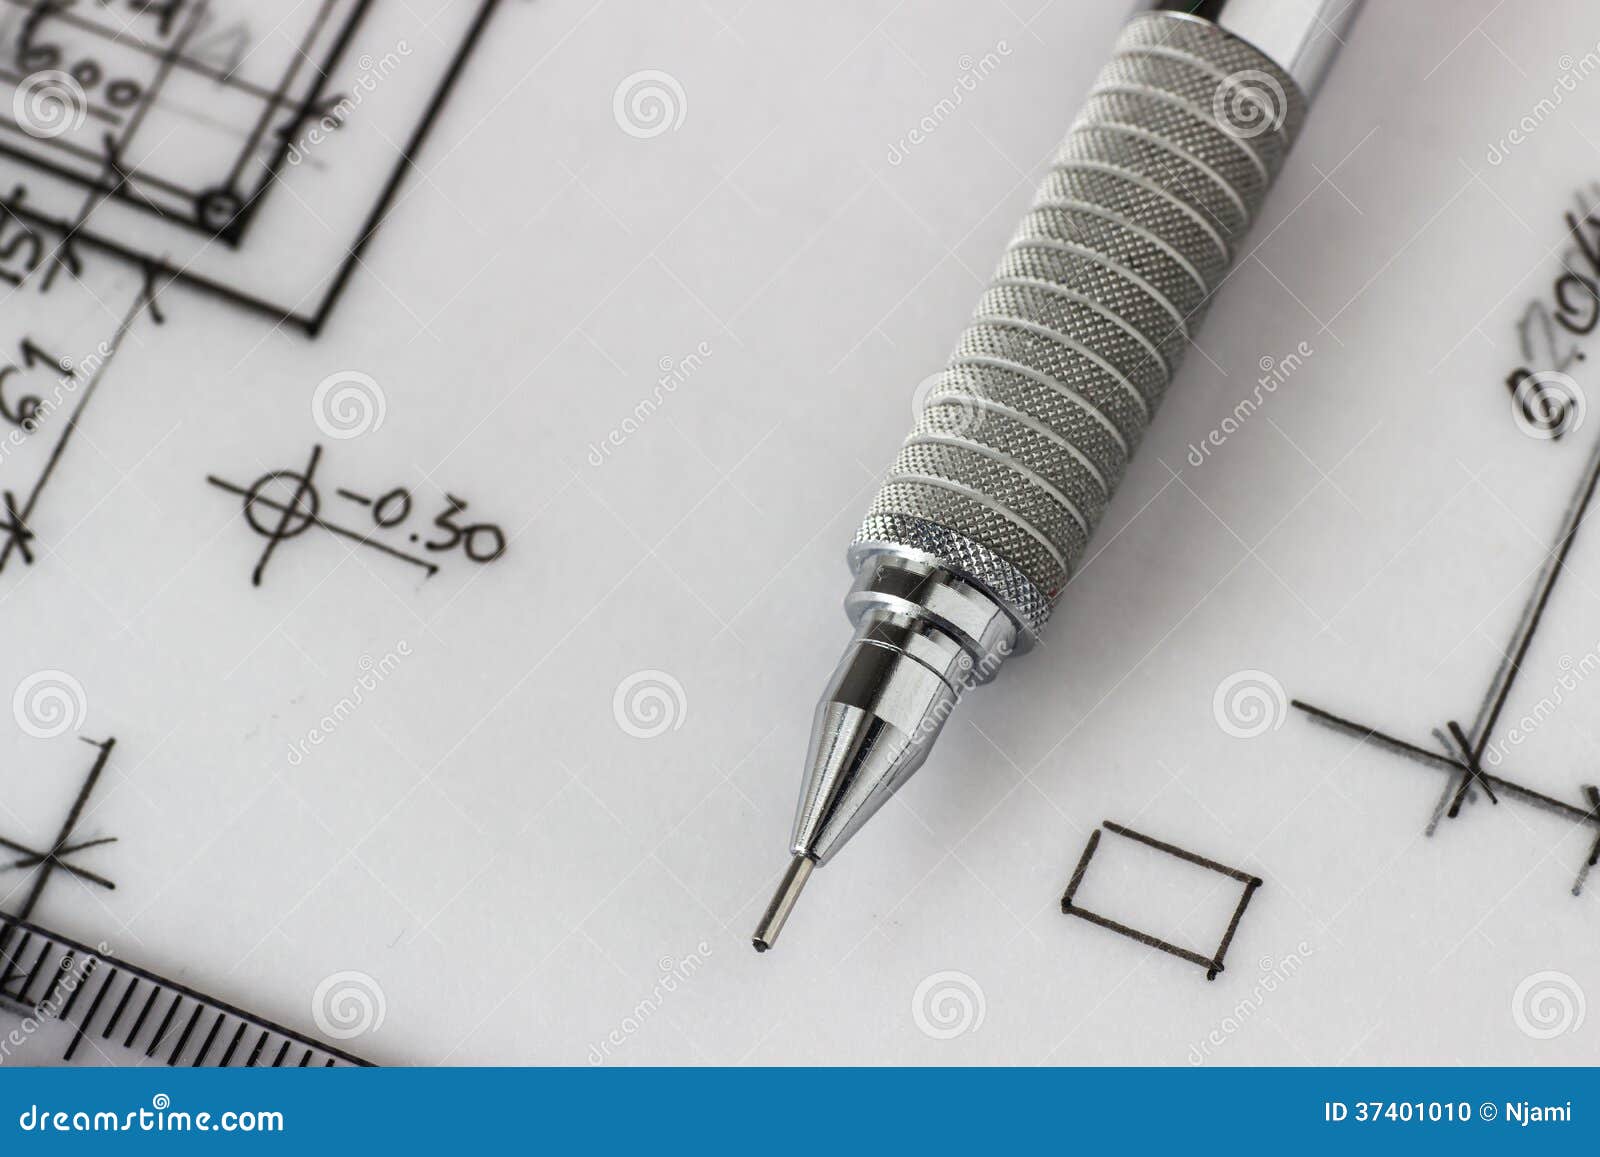 Mechanical Pencil on Drawing Stock Photo - Image of scheching, black